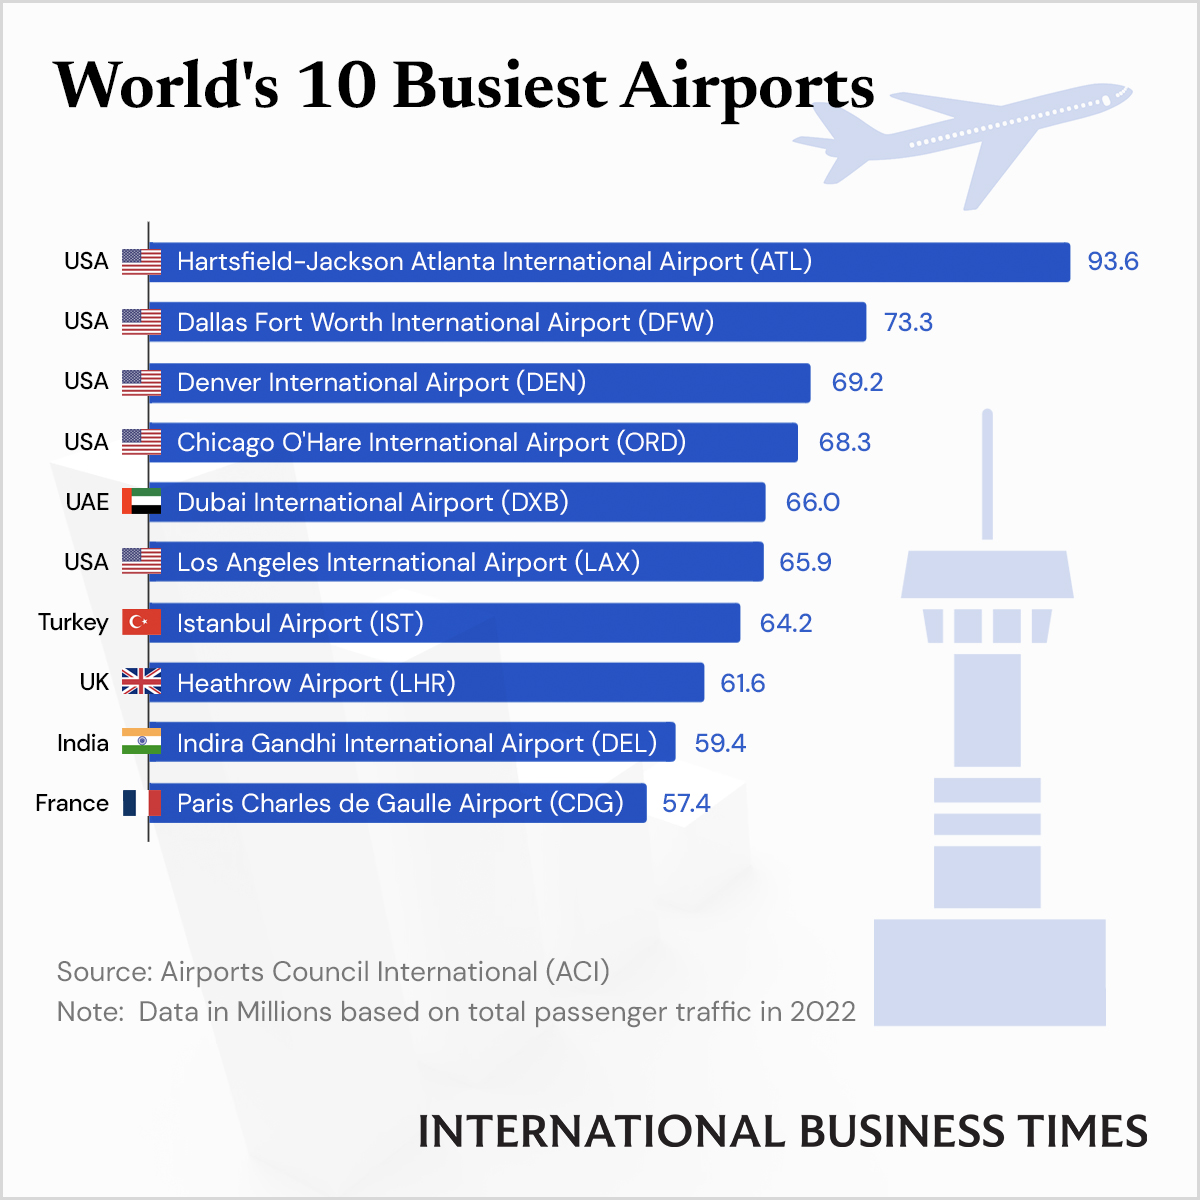 5 Of The World's 10 Busiest Airports Are In The US - IBT Graphics | IBTimes